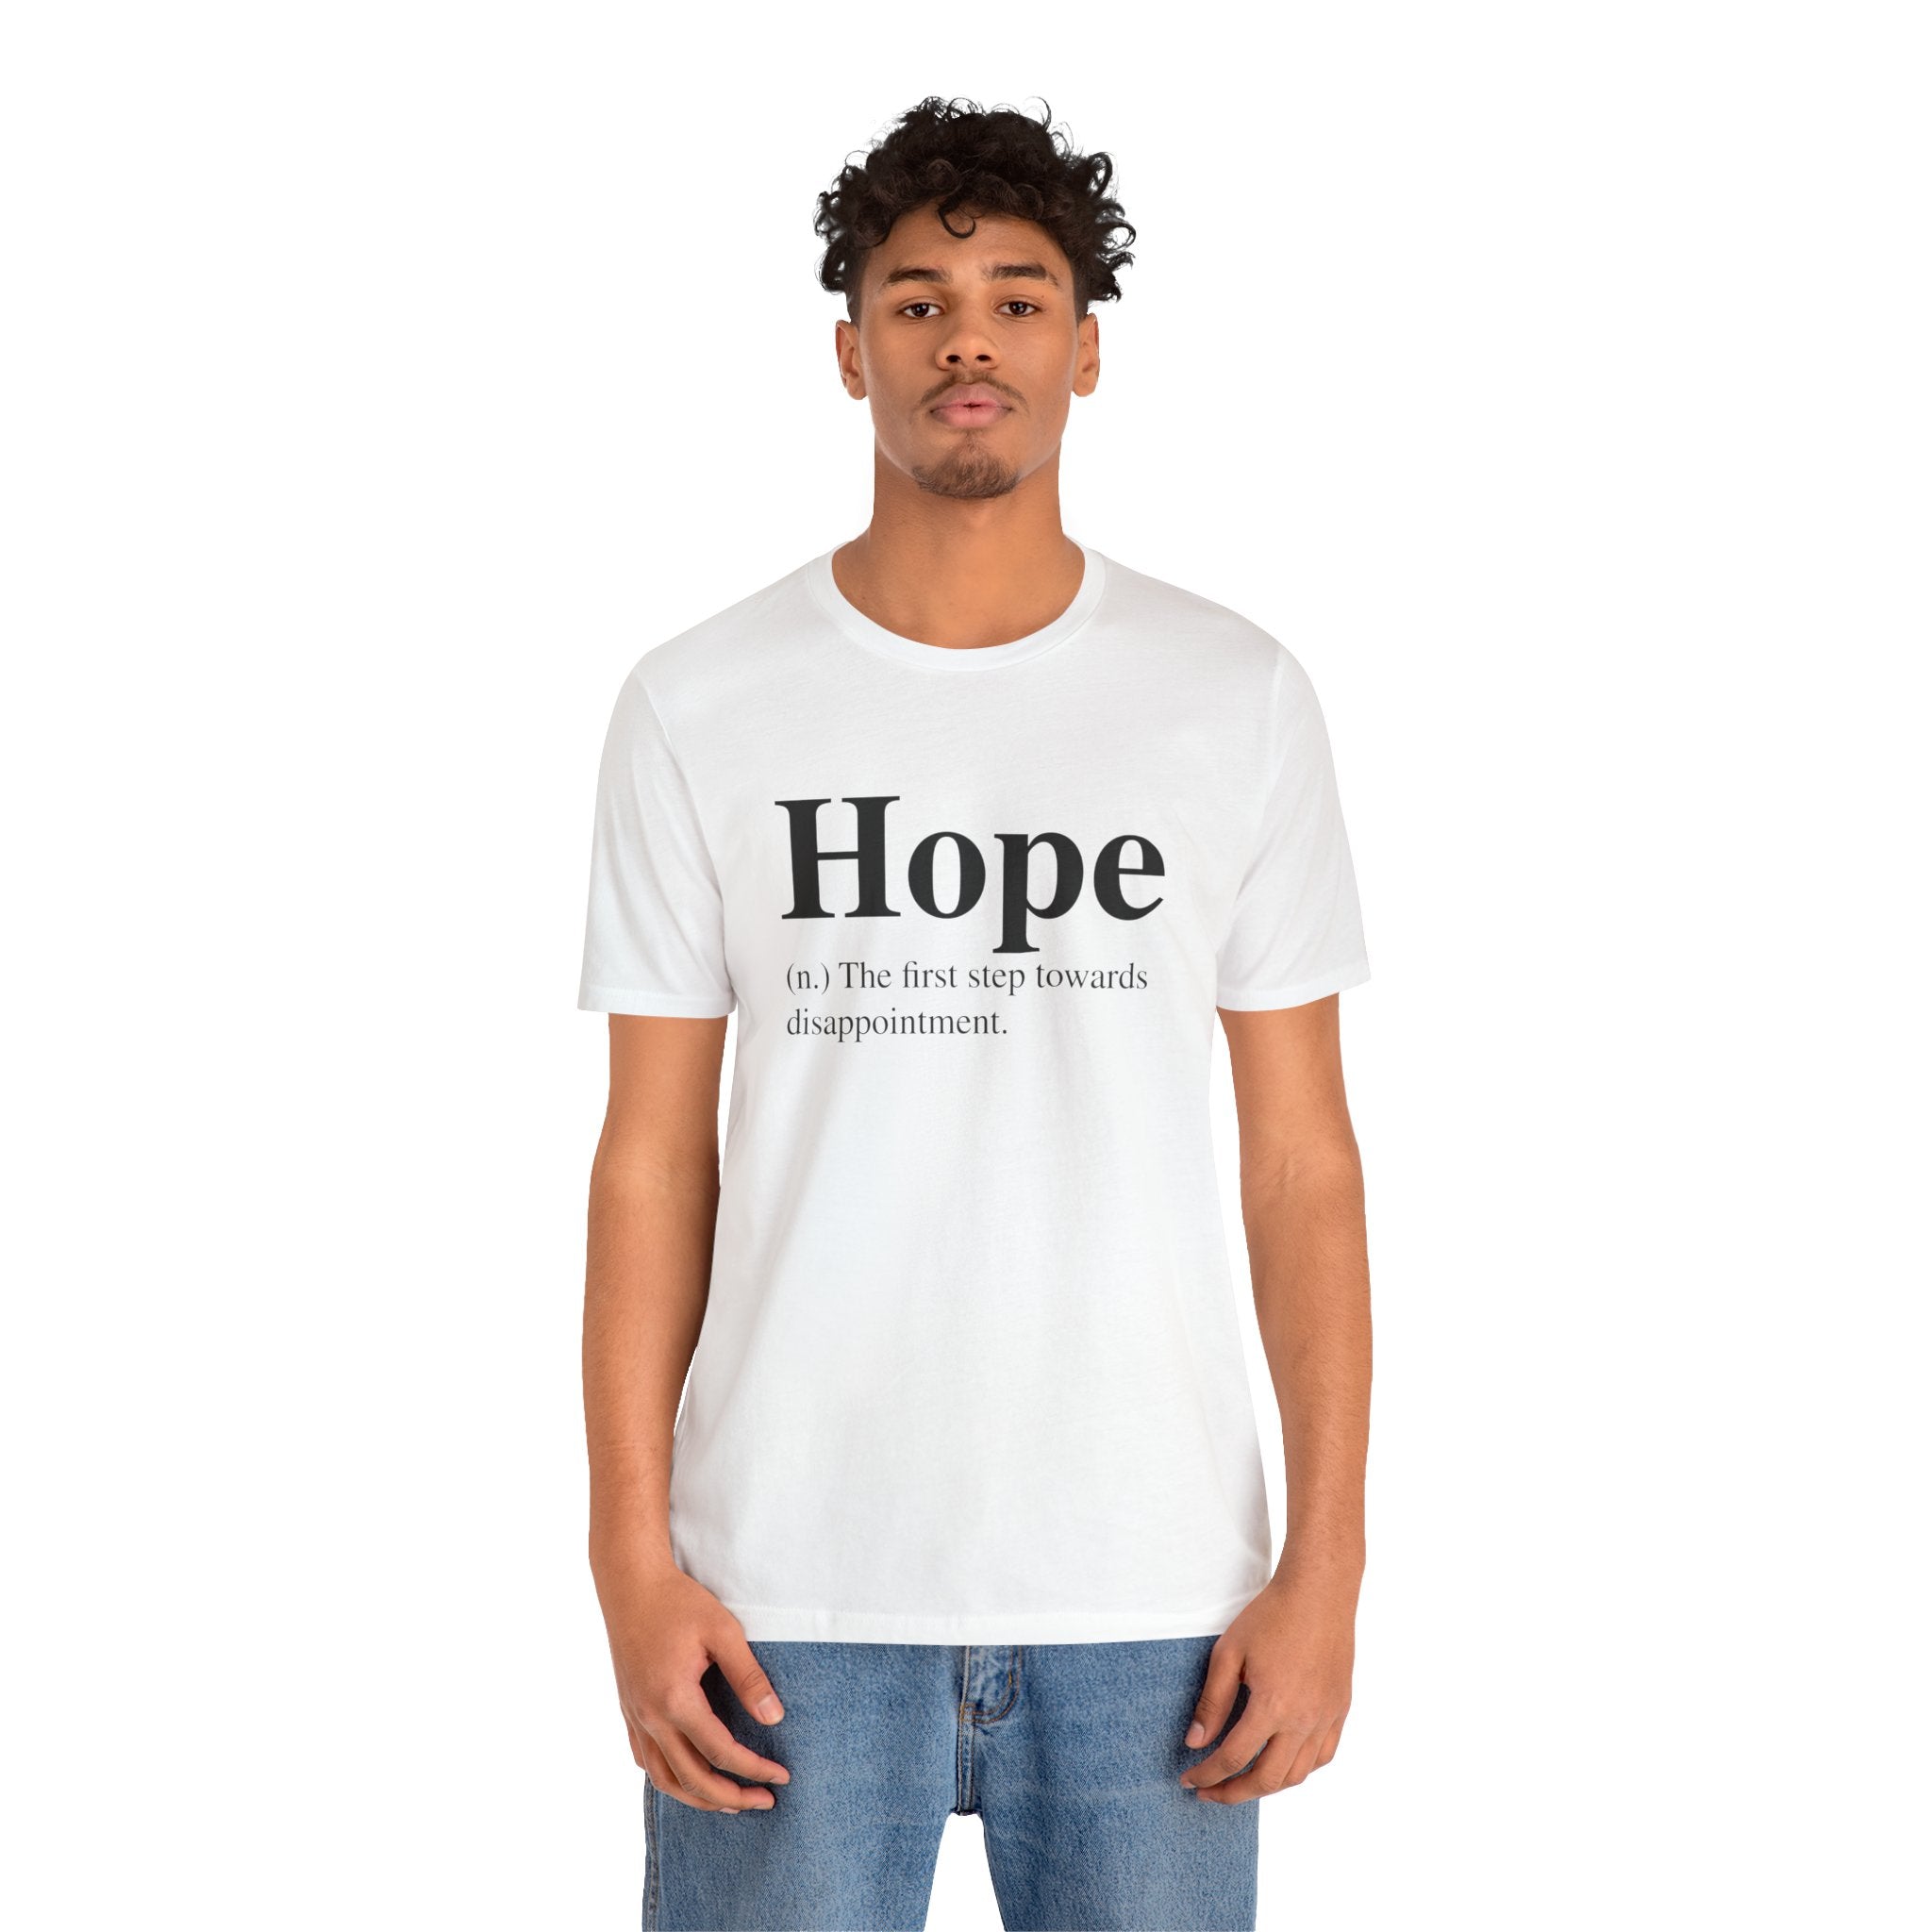 A young man wearing a soft cotton, white unisex Hope T-Shirt with the word "hope" and its cynical definition printed on it, paired with blue jeans.